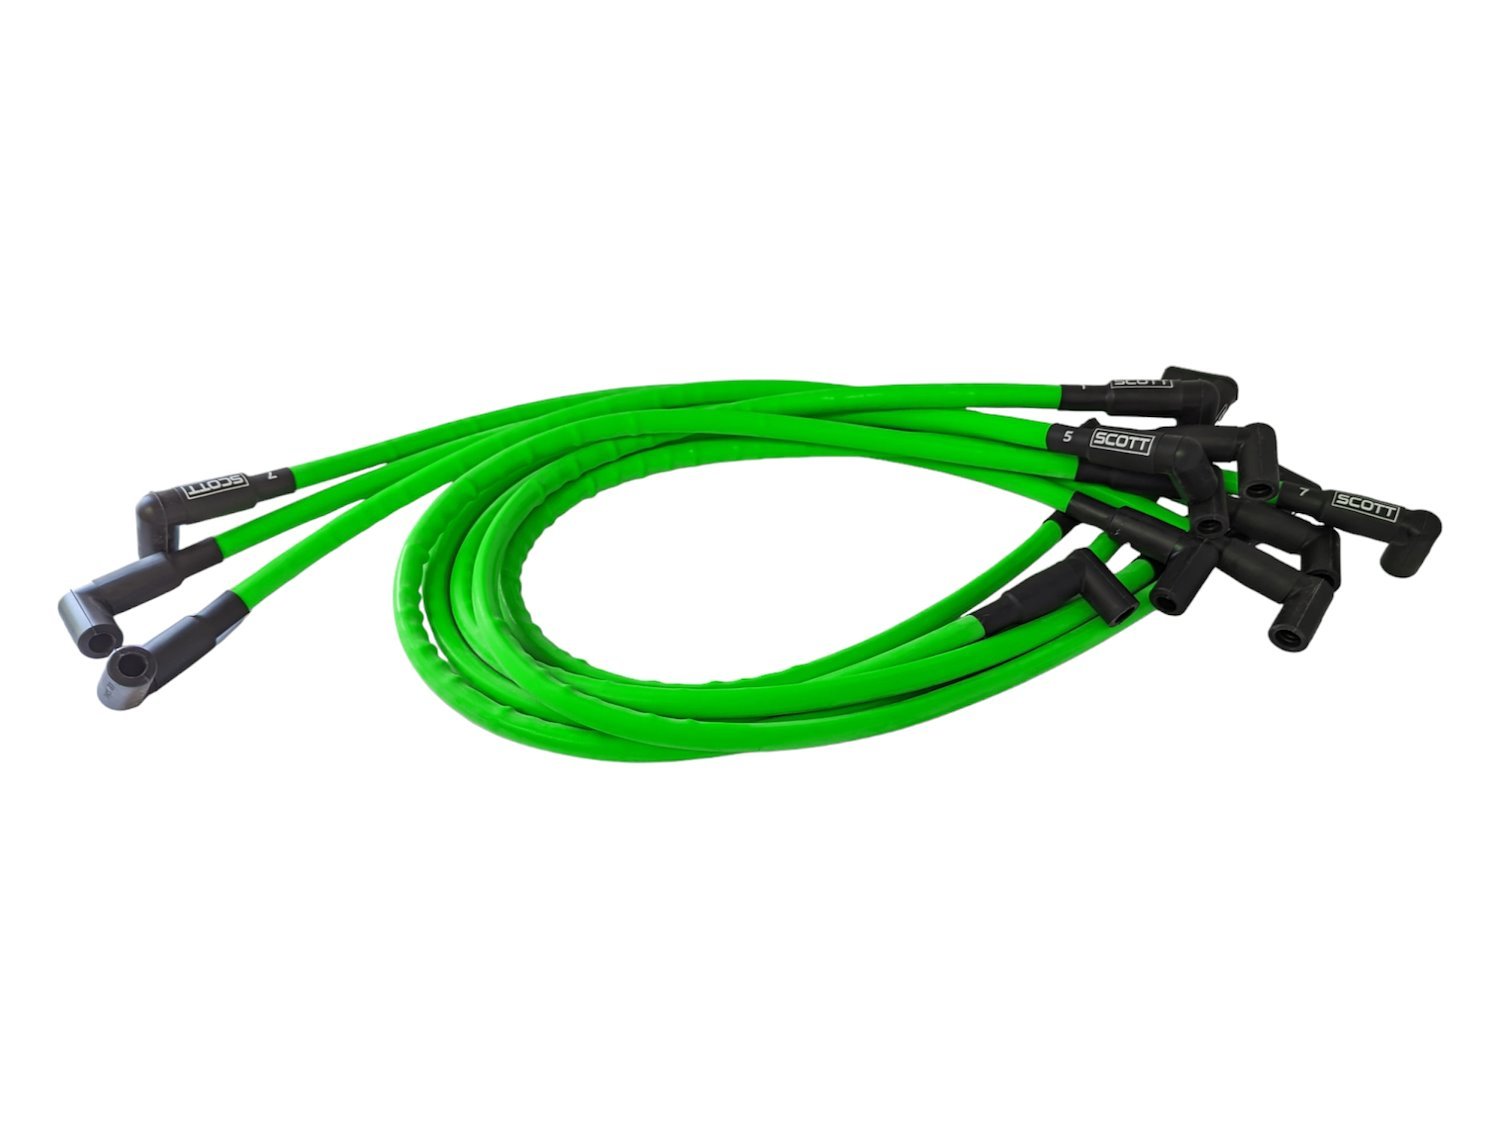 SPW-CH-439-8 High-Performance Silicone-Sleeved Spark Plug Wire Set for Small Block Ford, Under Header [Fluorescent Green]